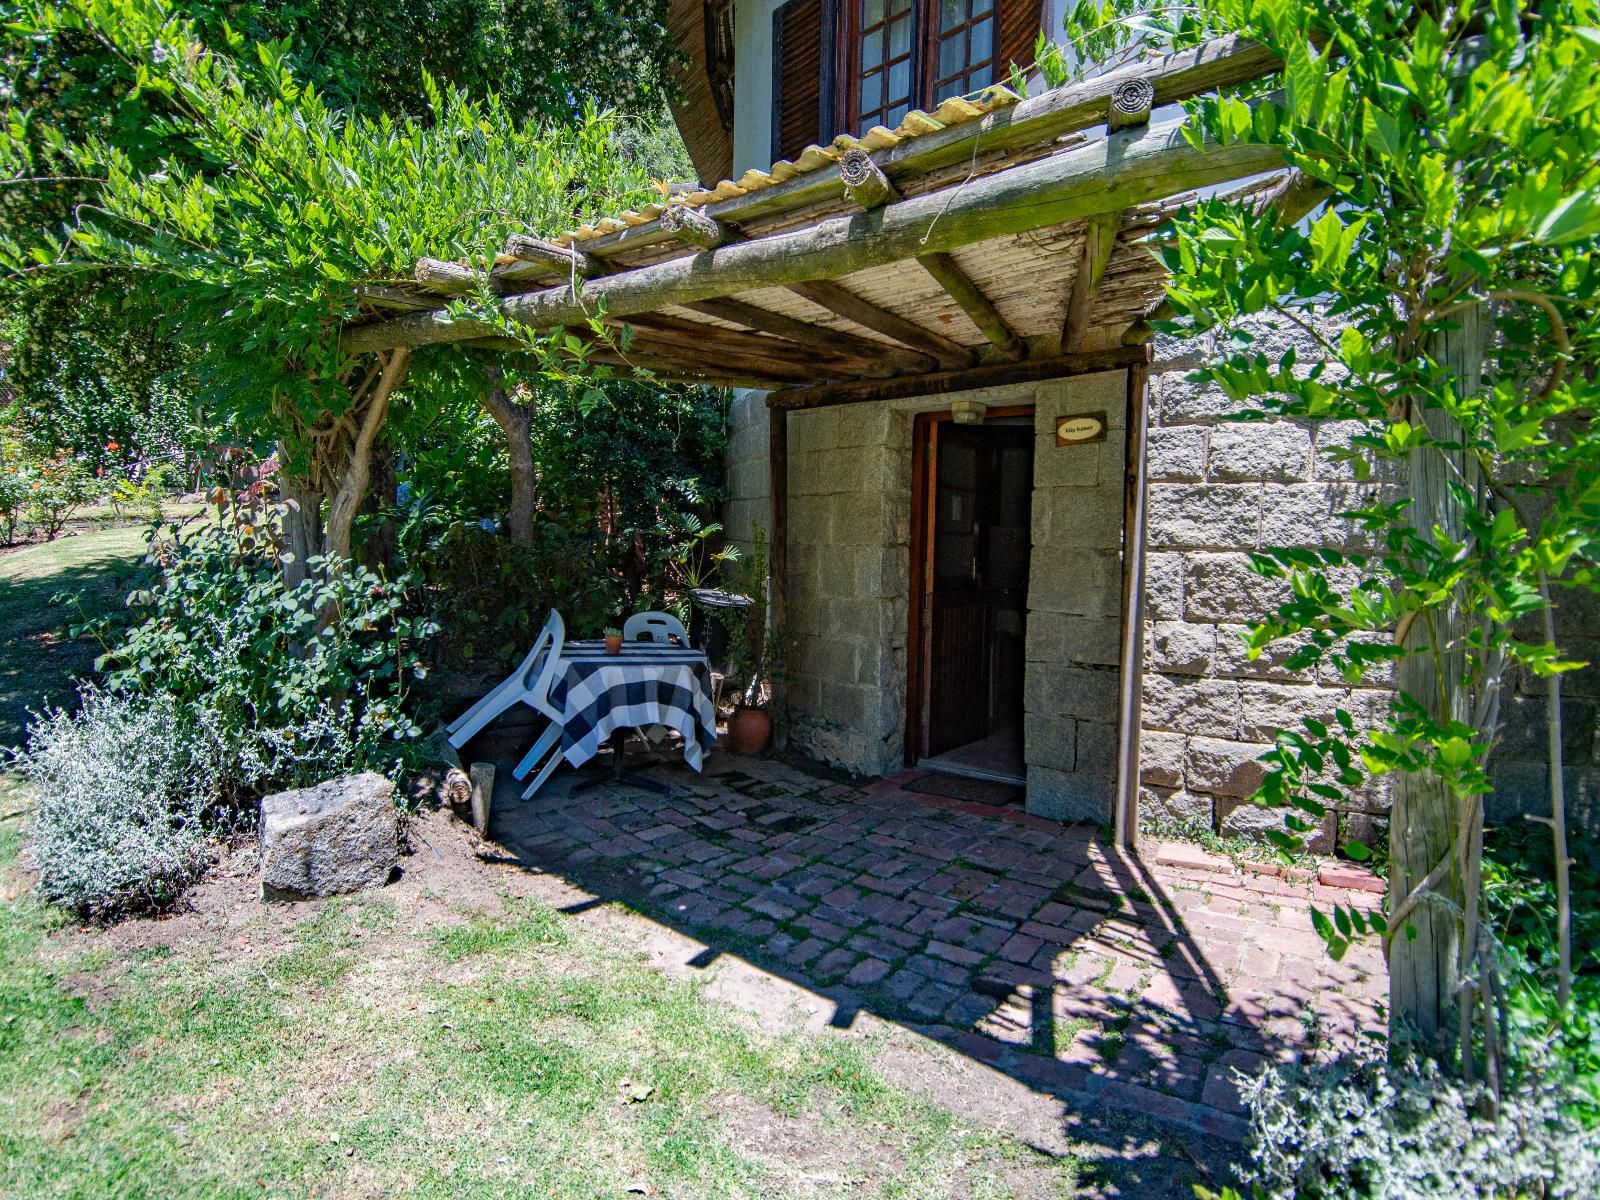 Picardie Guest Farm Paarl Western Cape South Africa Cabin, Building, Architecture, Garden, Nature, Plant